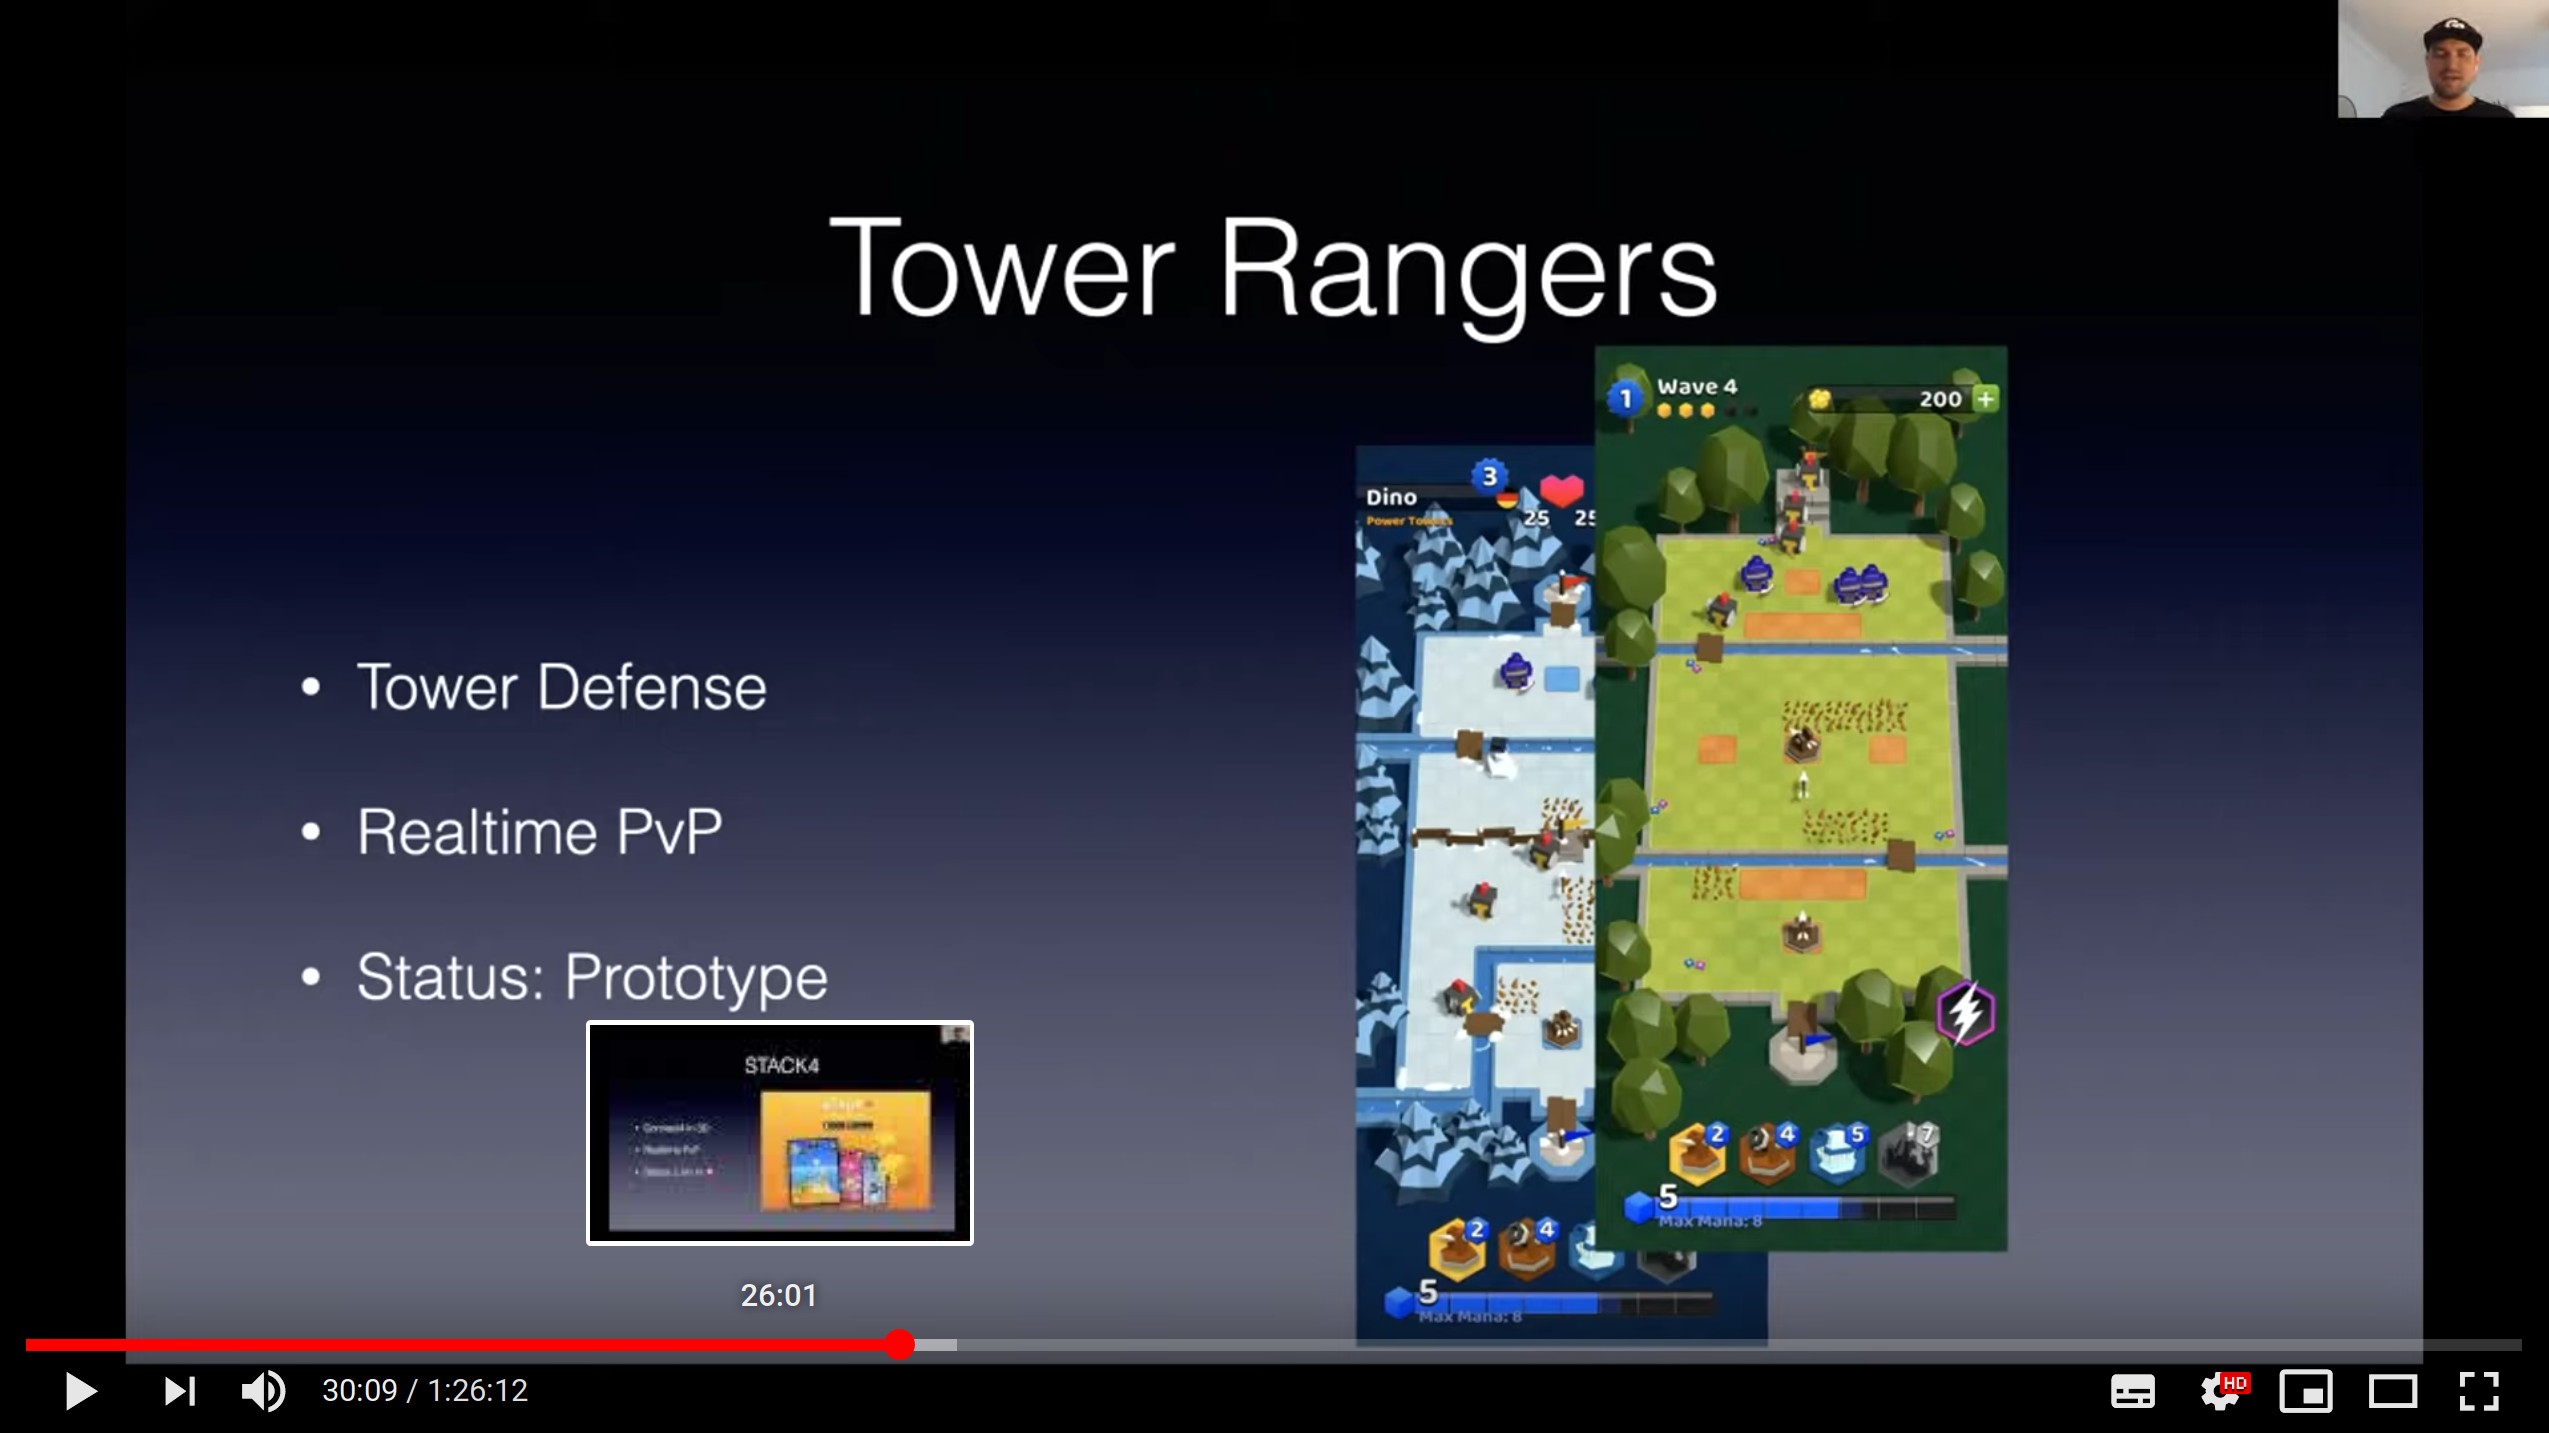 youtube preview: a slide with Tower Rangers game